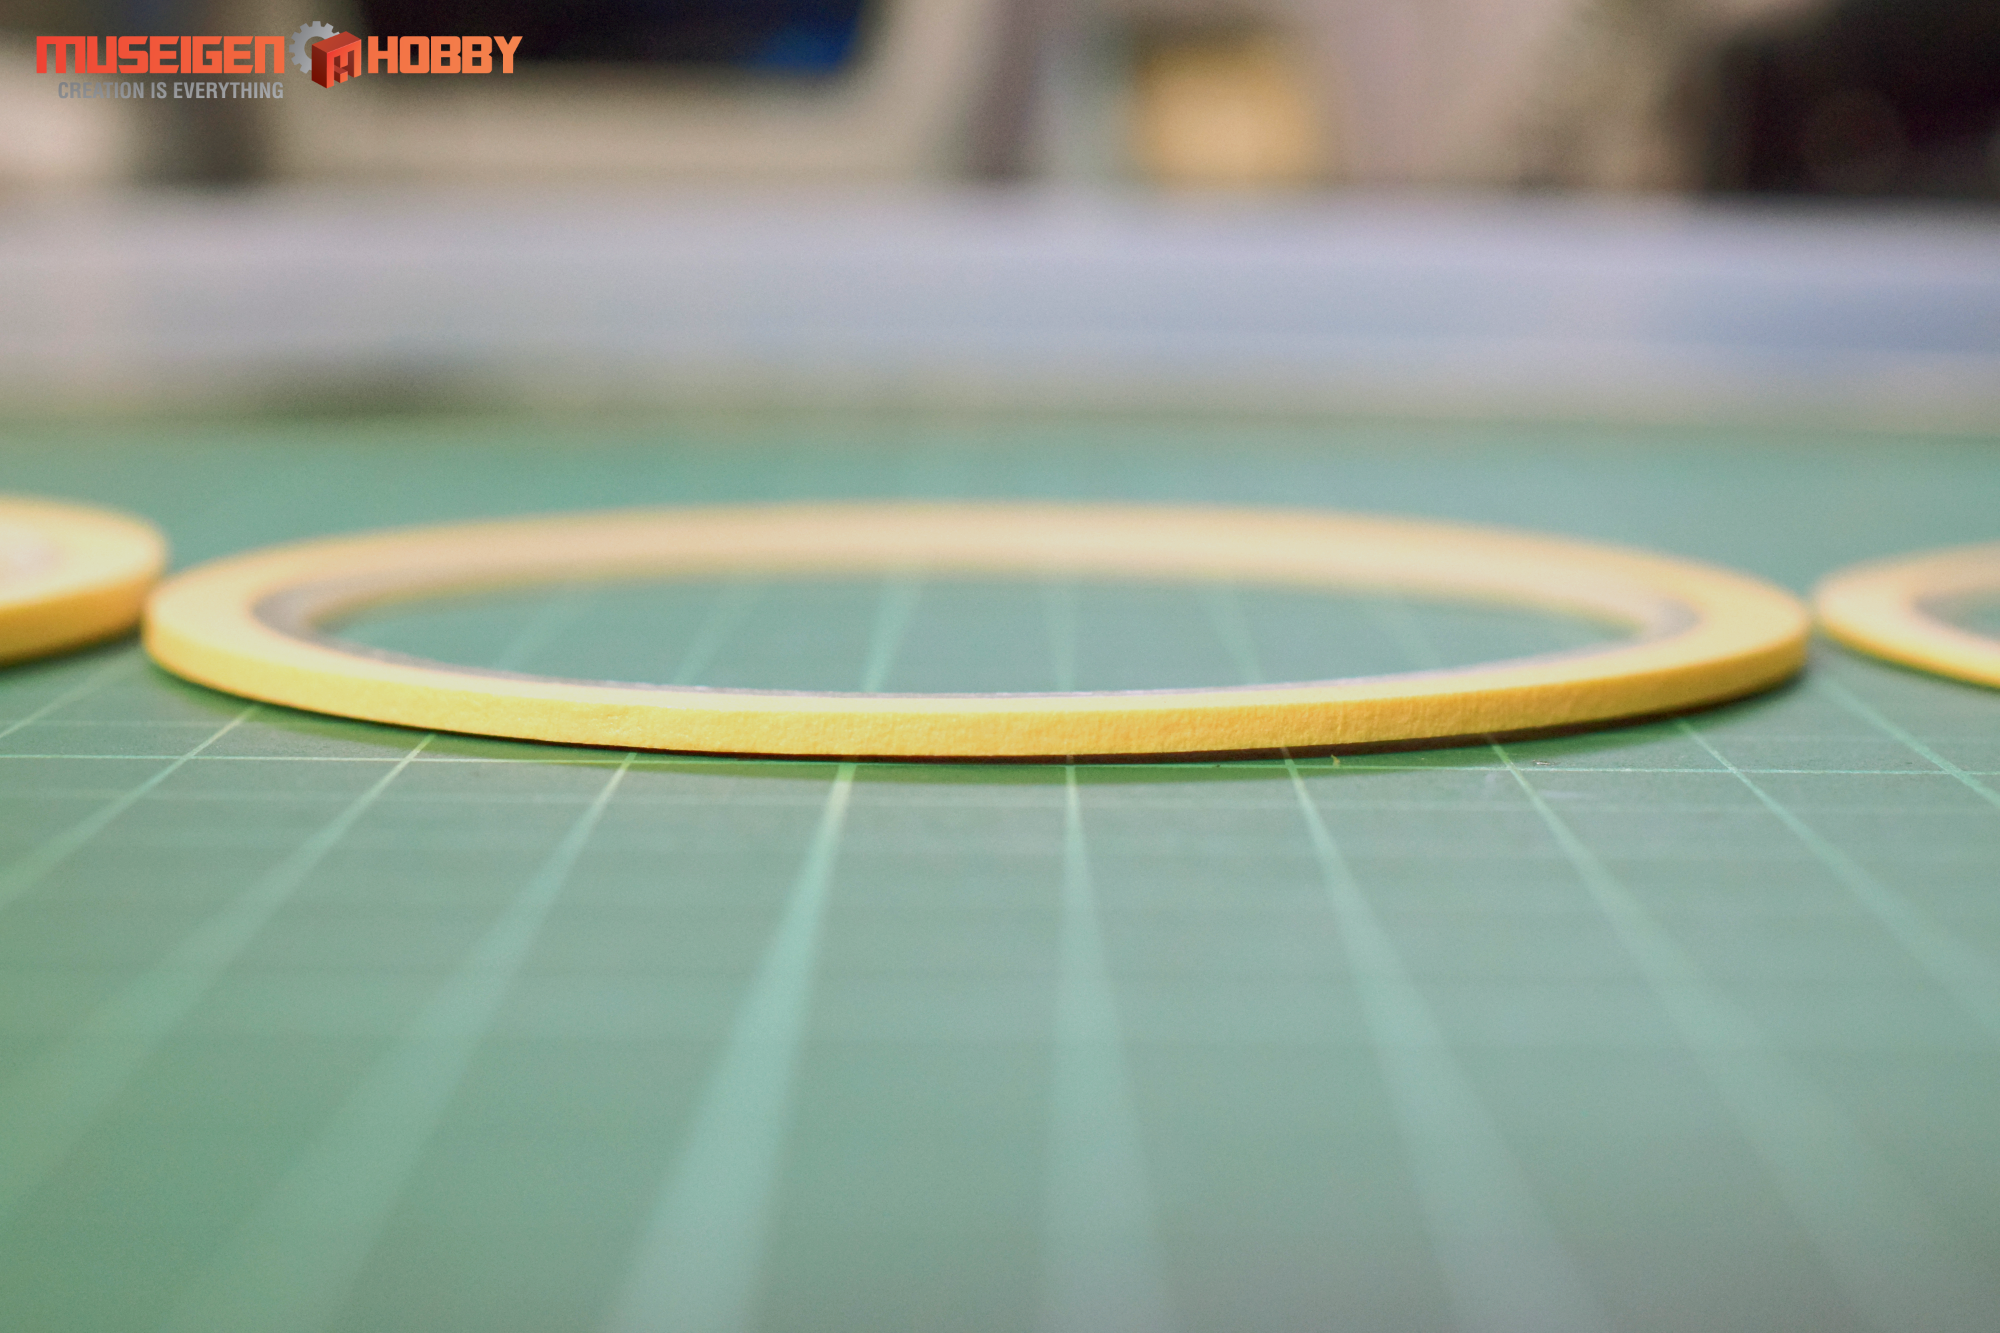 HD Precision Curved Masking Tape 2mm